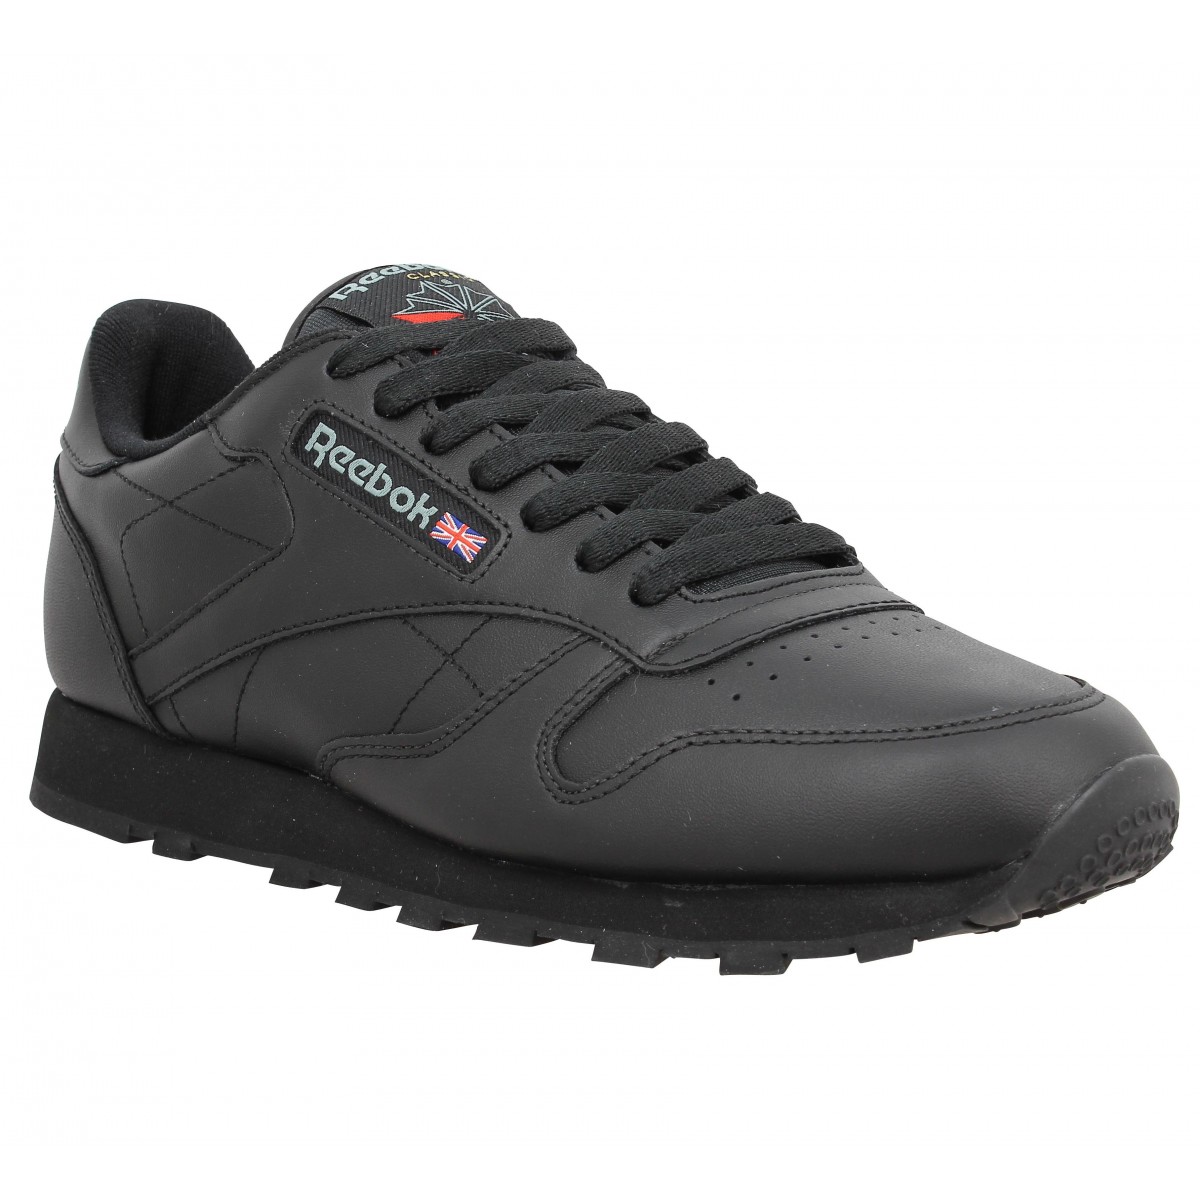 reebok classic chaussure homme